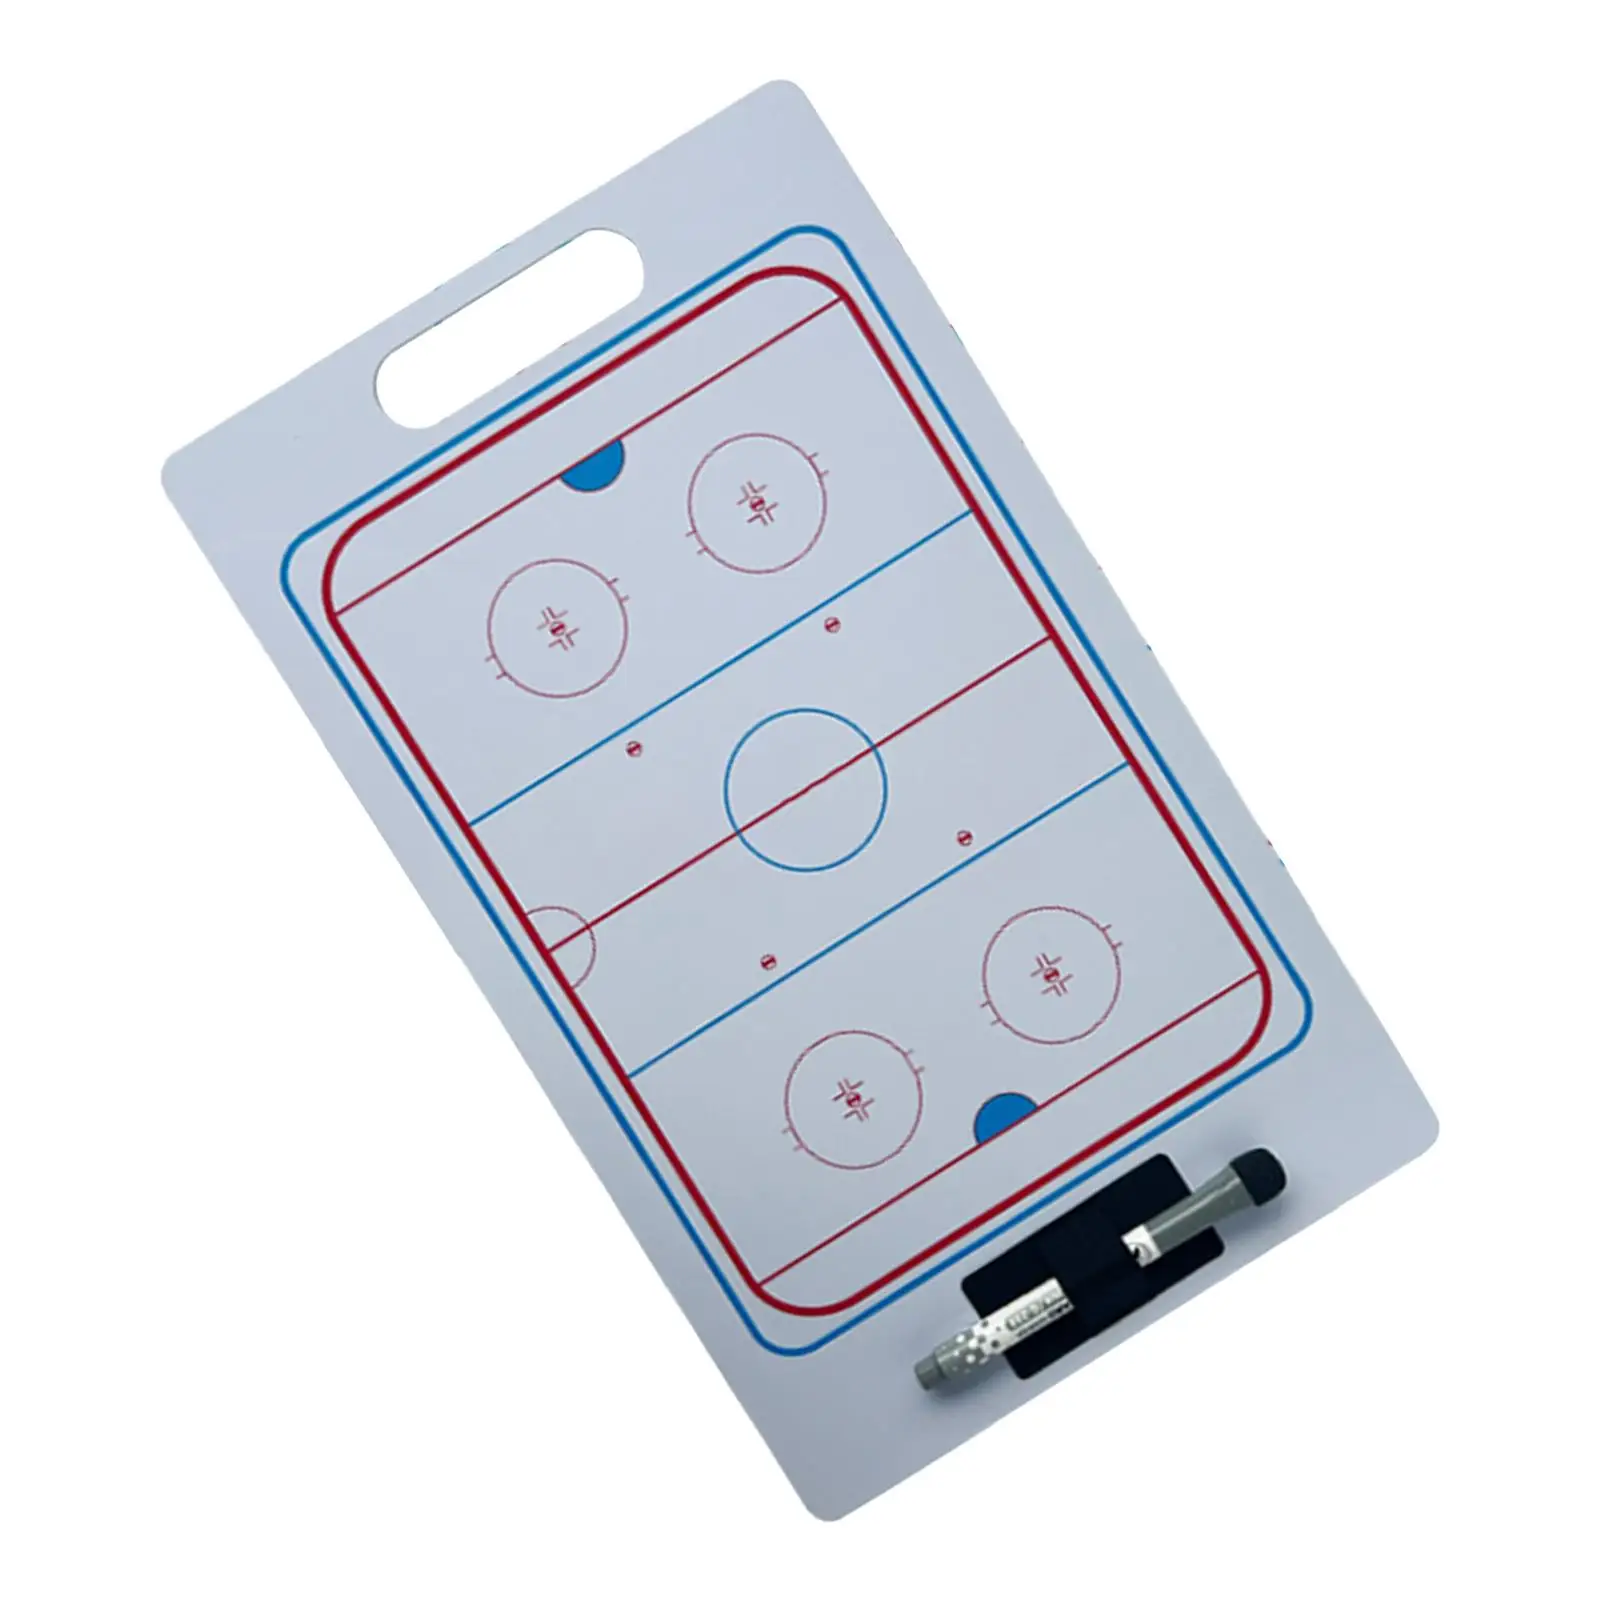 

Hockey Coaching Boards Football Coaching Boards Guidance Training Aid Practice Board Teaching Assistant Referee Tactic Board